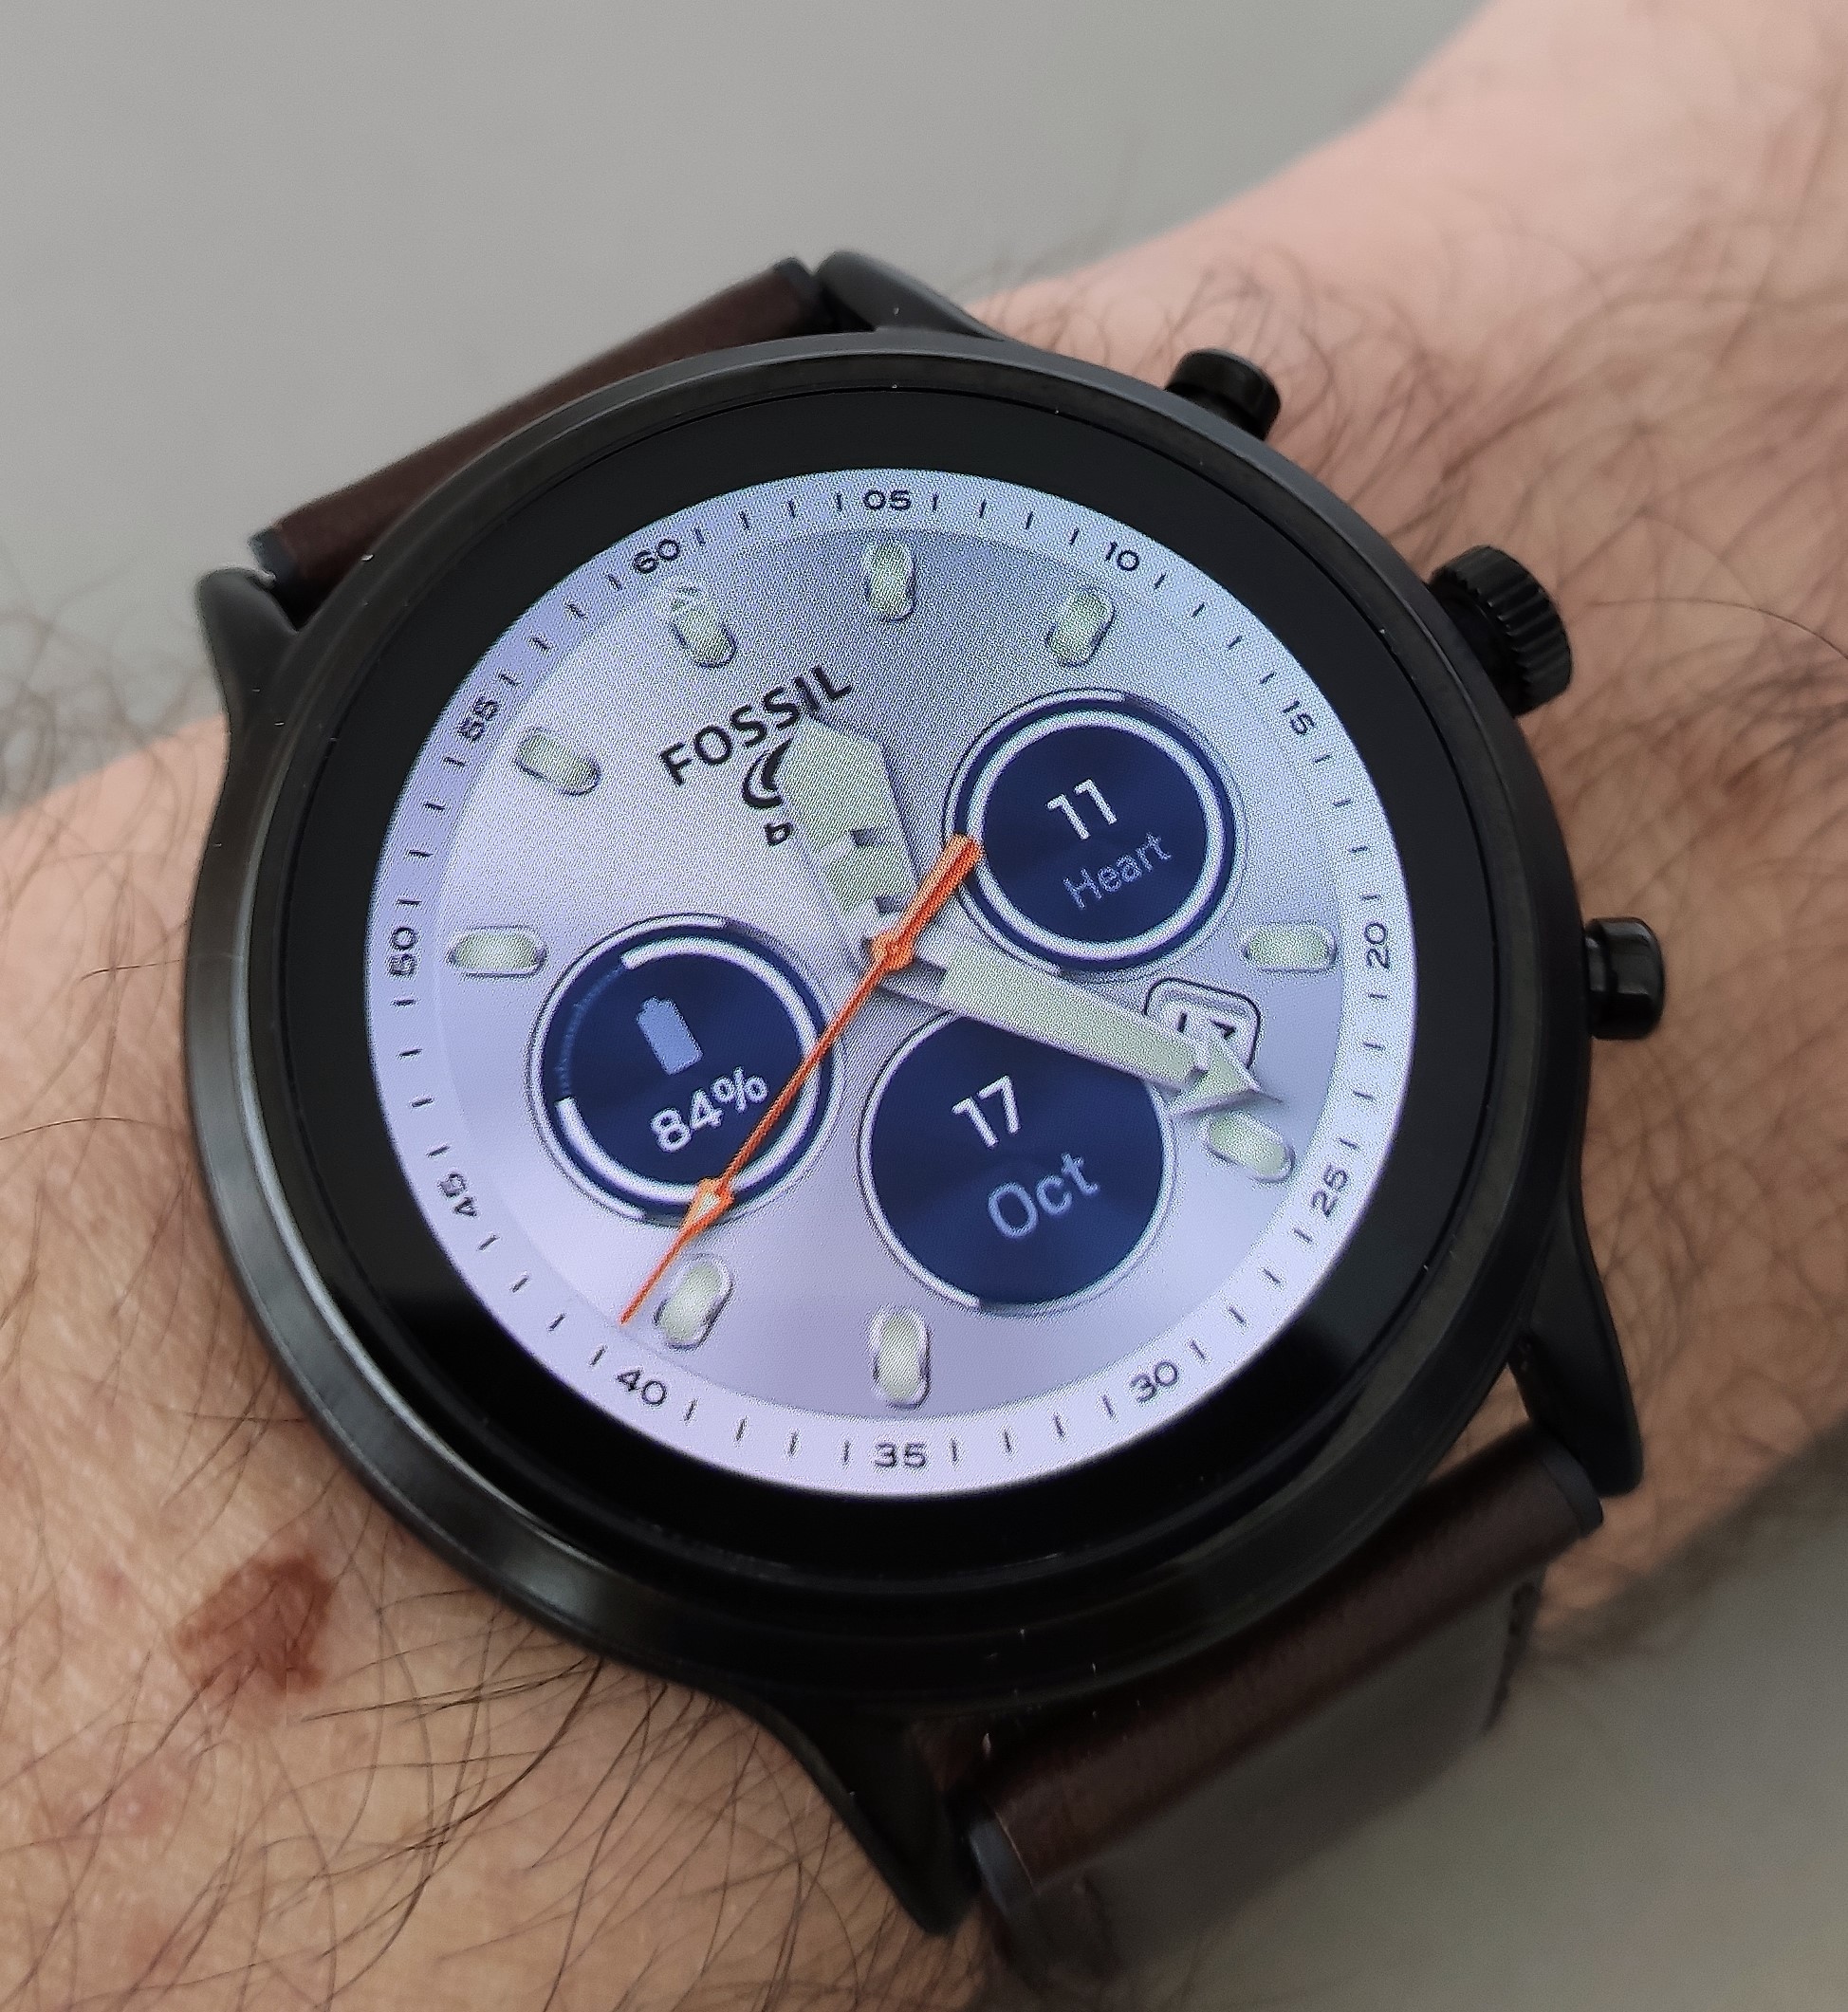 Fossil optimises the performance of smartwatches by removing over 30 watchfaces - NotebookCheck.net News